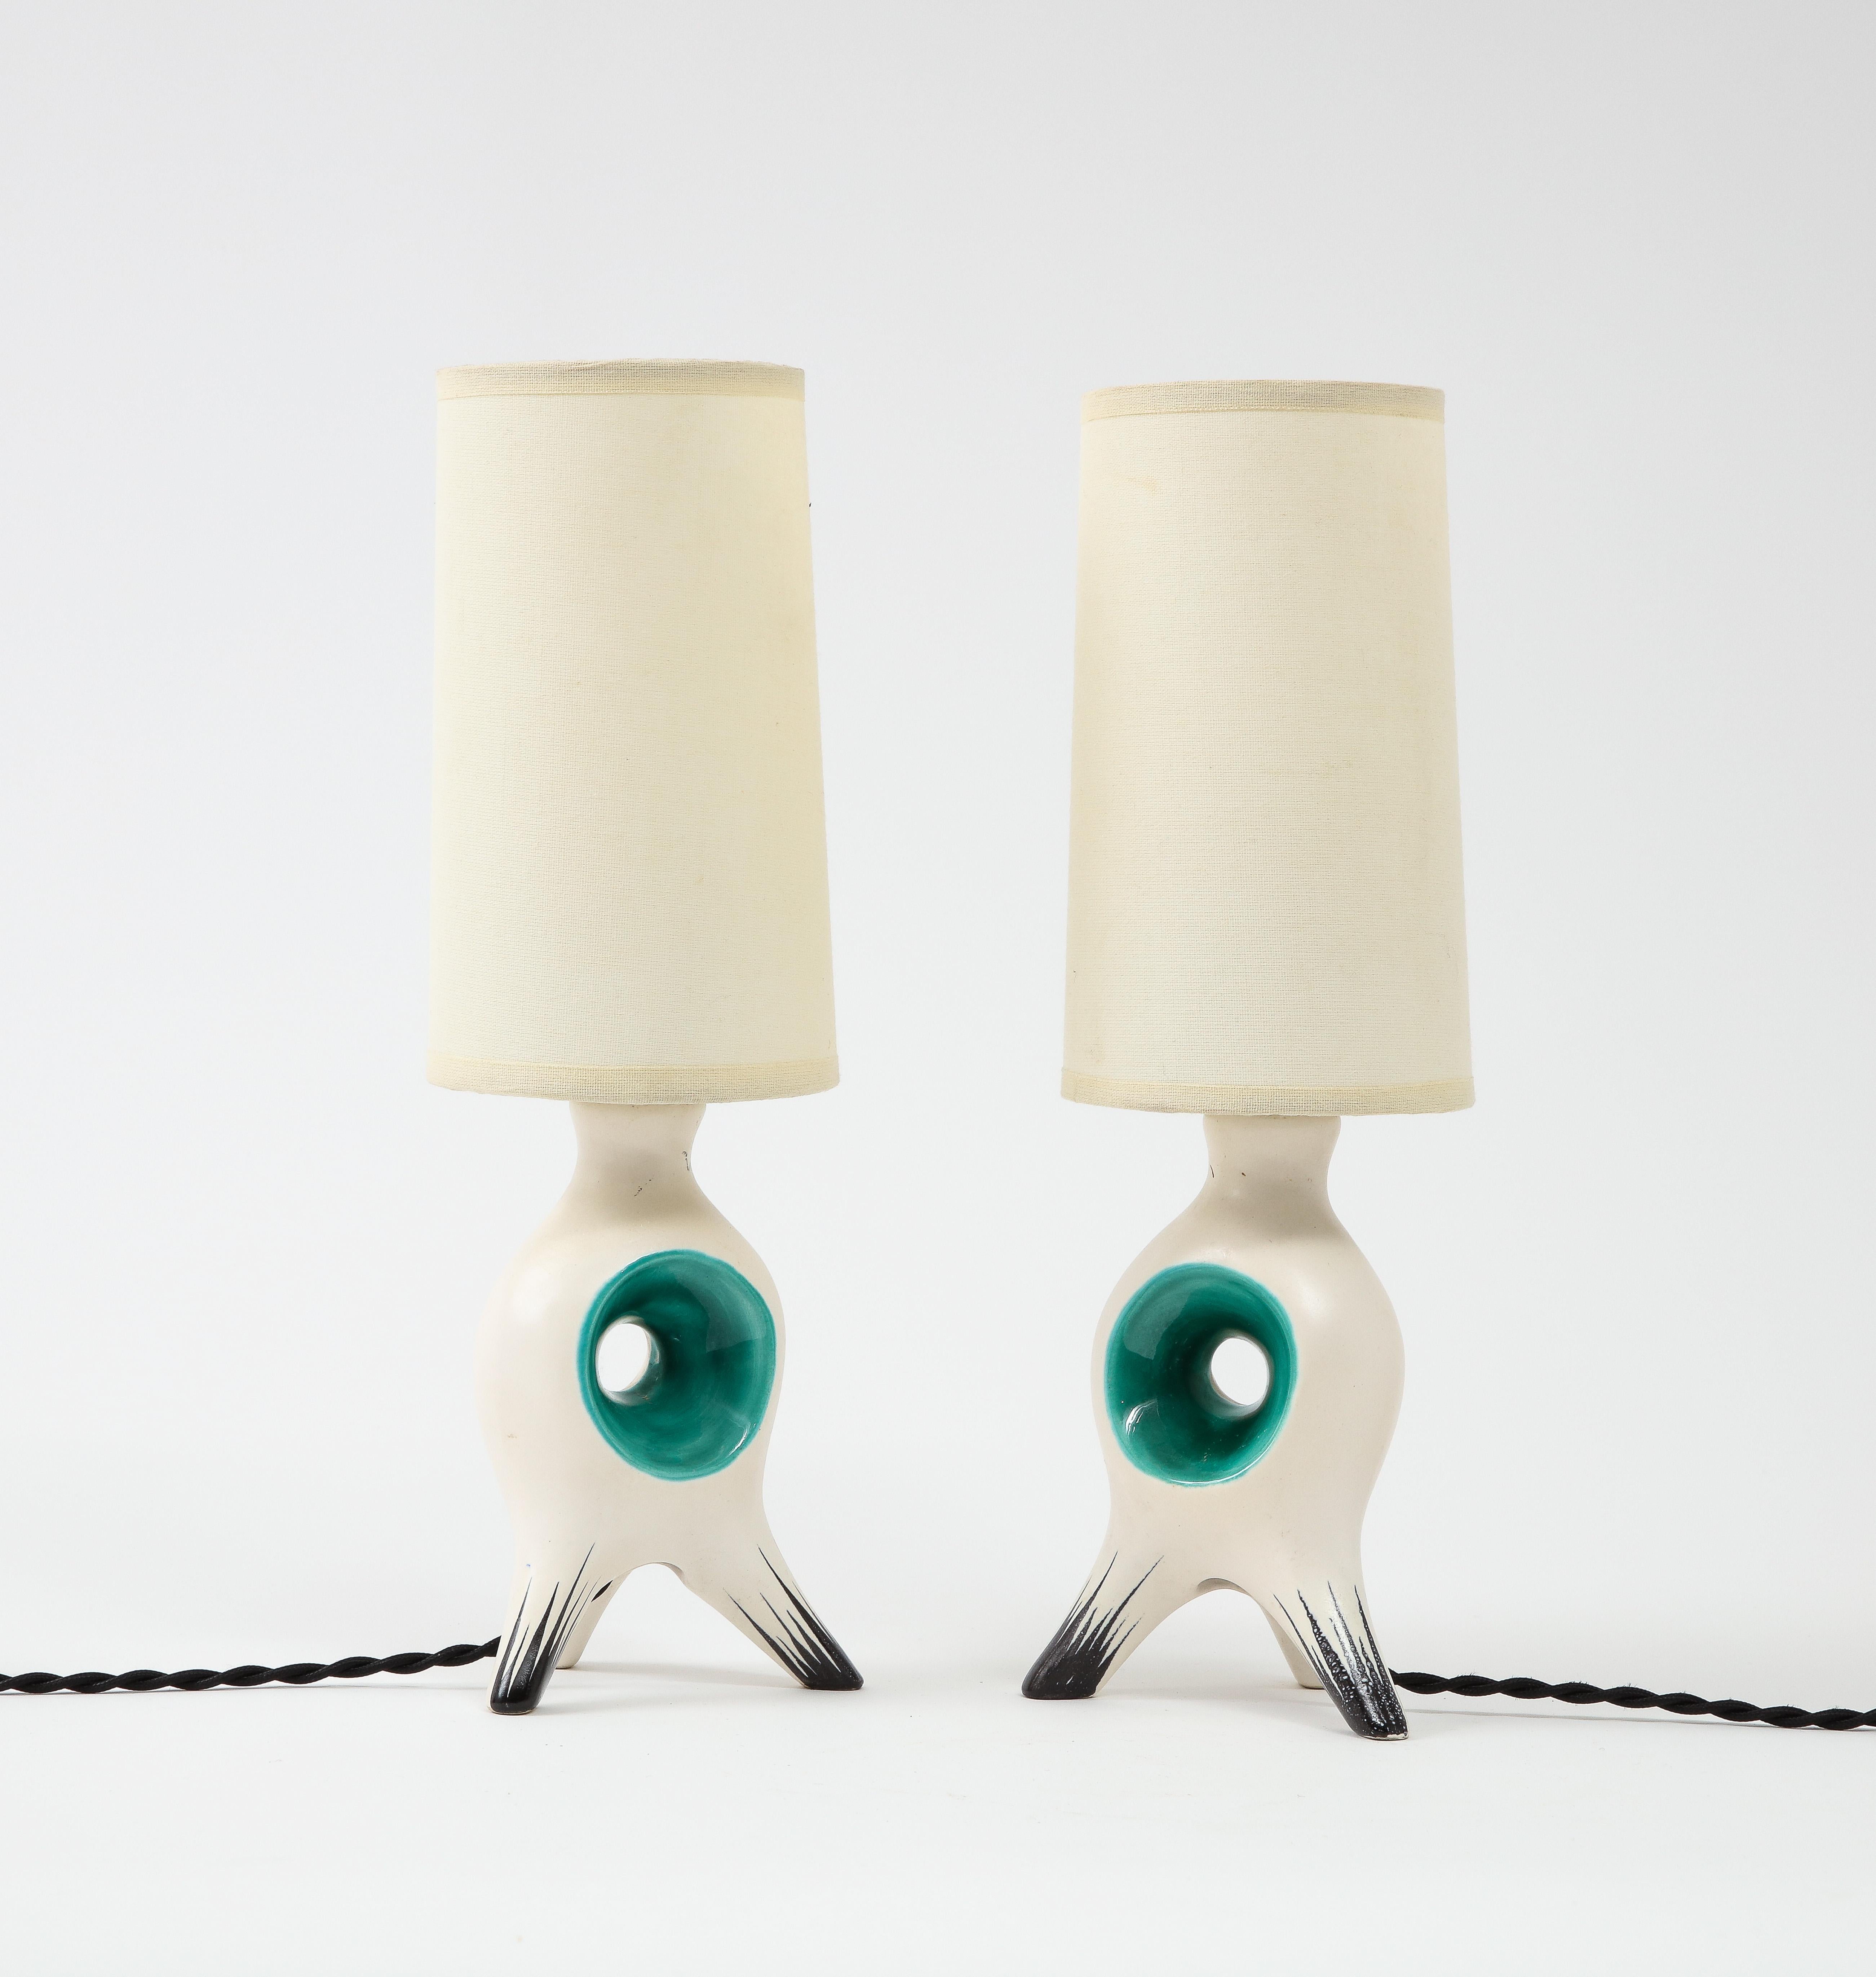 Whimsical table ceramic table lamps in the style of George Jouve, with a soft white glaze and green/black accents. Rewired with silk cords and candelabra sockets. No Shades included. Base only is 9''x5''.